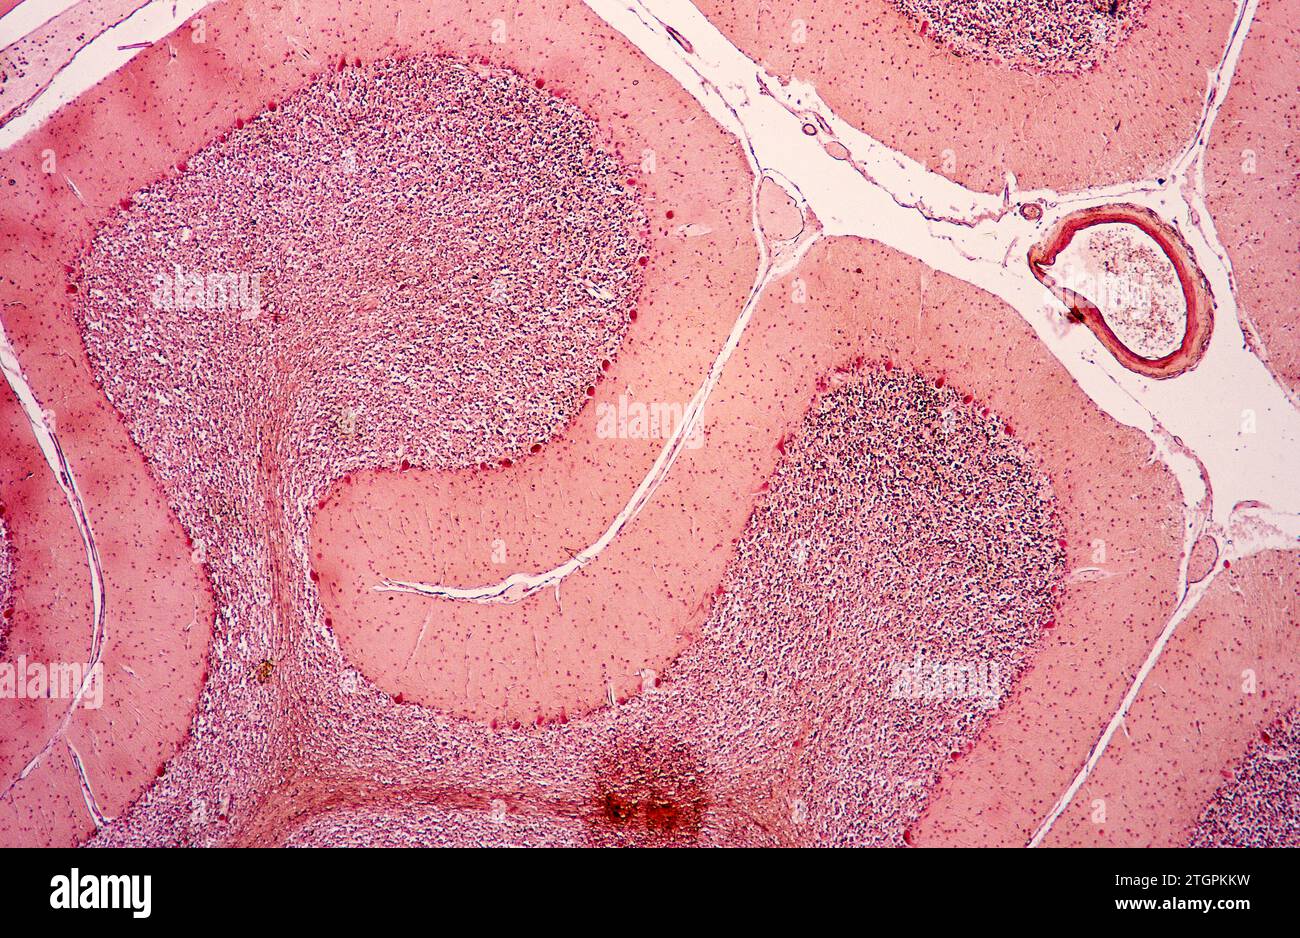 Human cerebellum section showing fisures, neurons, Purkinje cells and blood vessel. Photomicrograph. Stock Photo